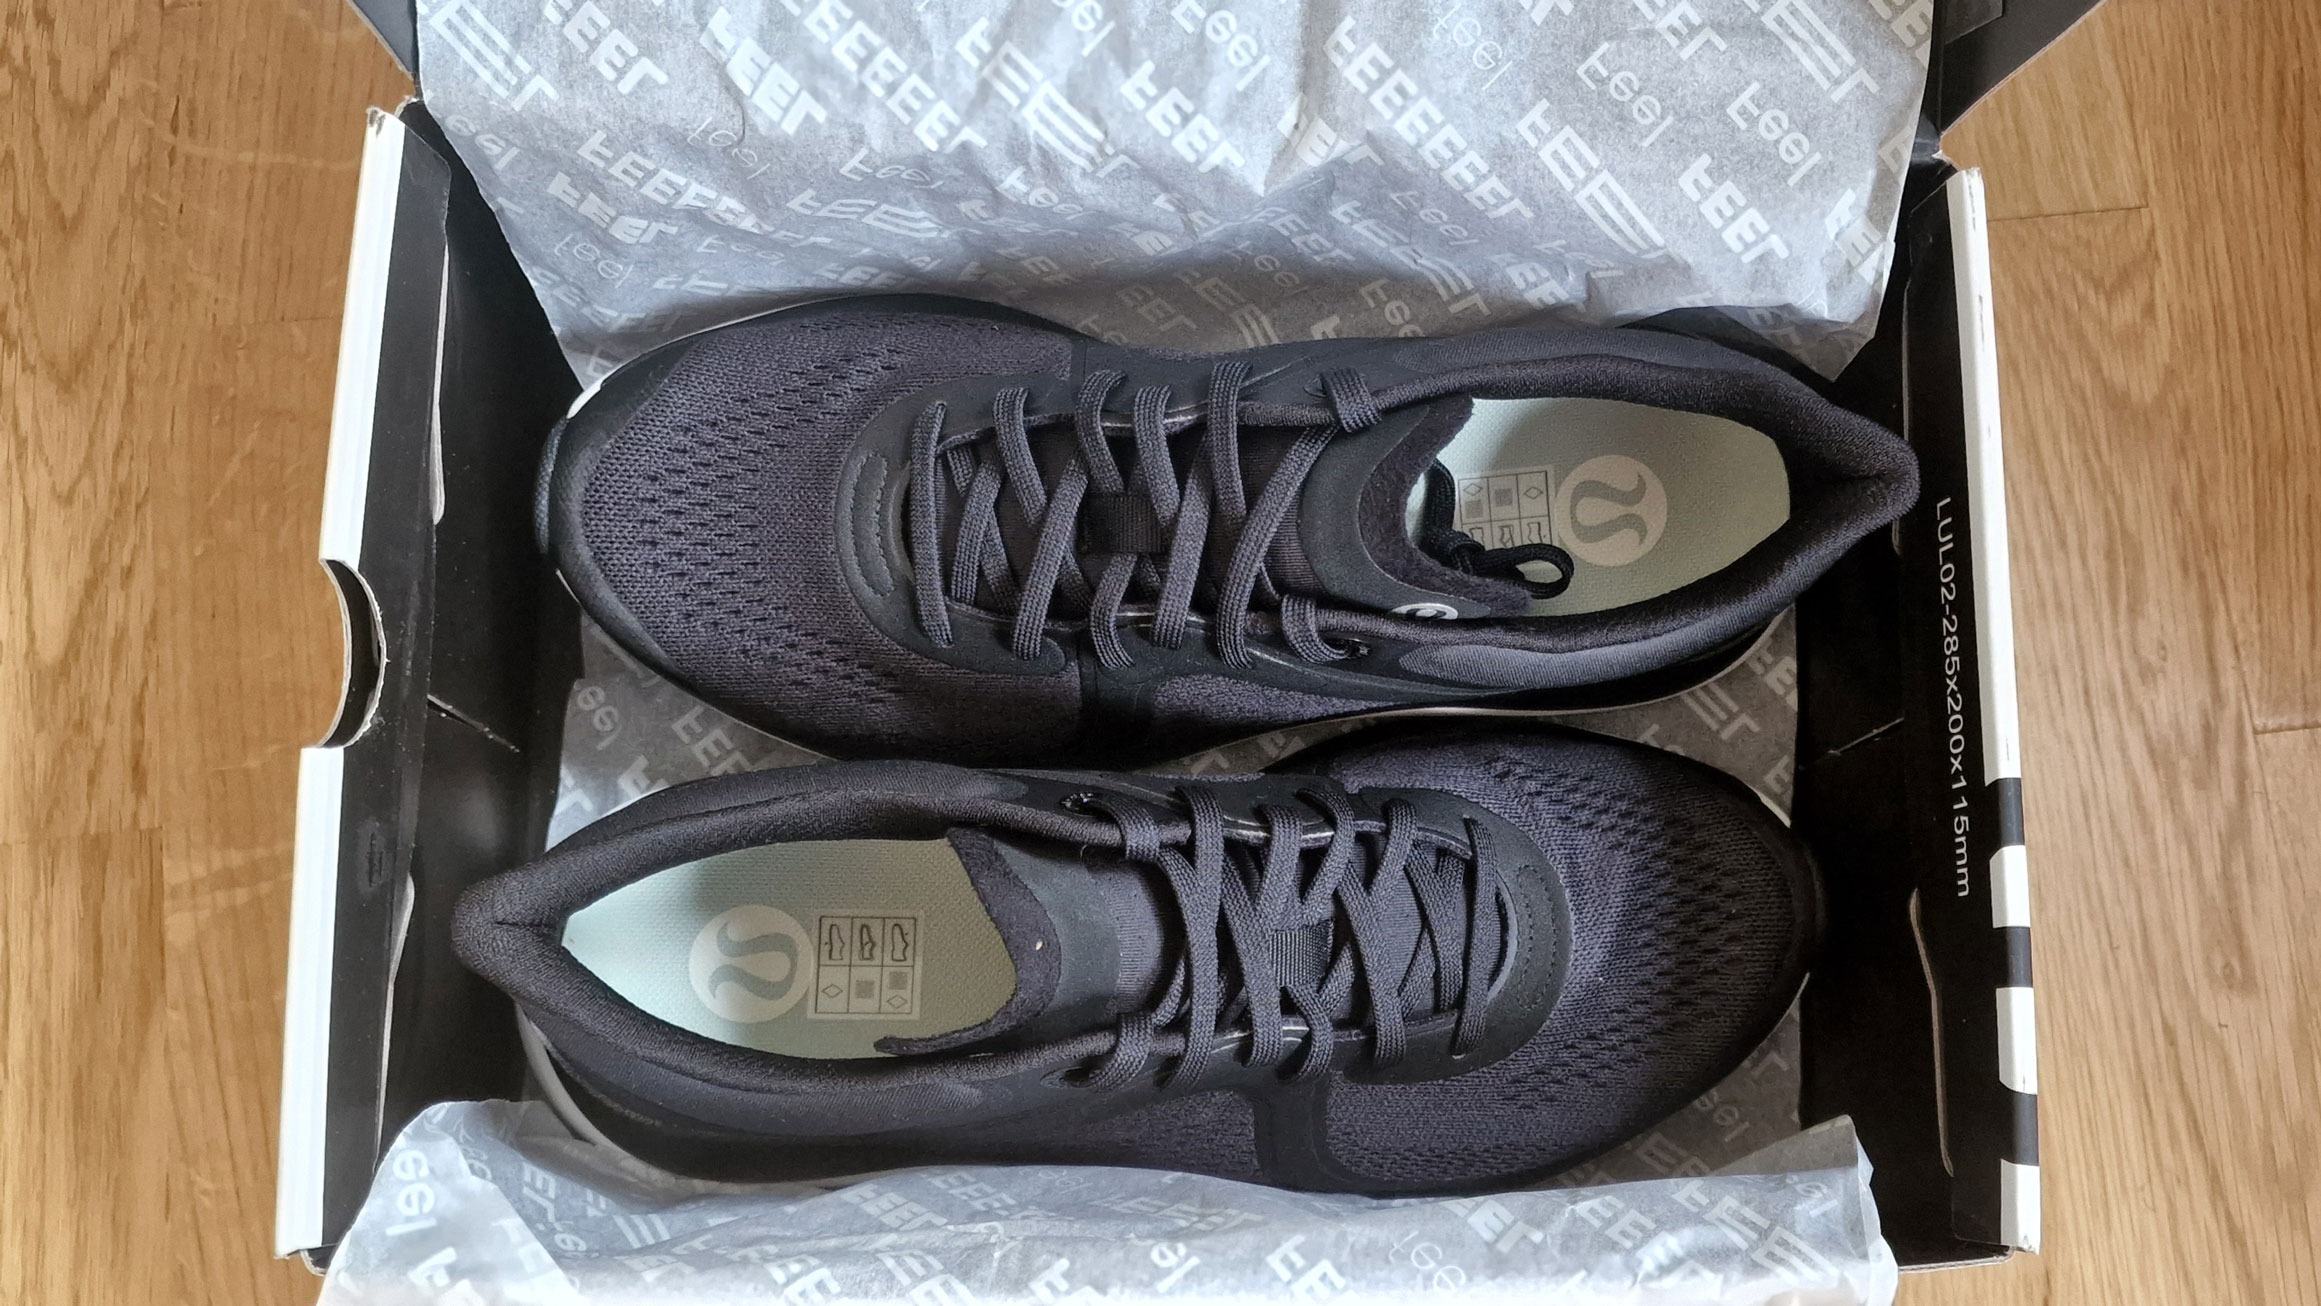 FOR TRAINING AND LIFESTYLE! lululemon strongfeel on foot review and how to  style